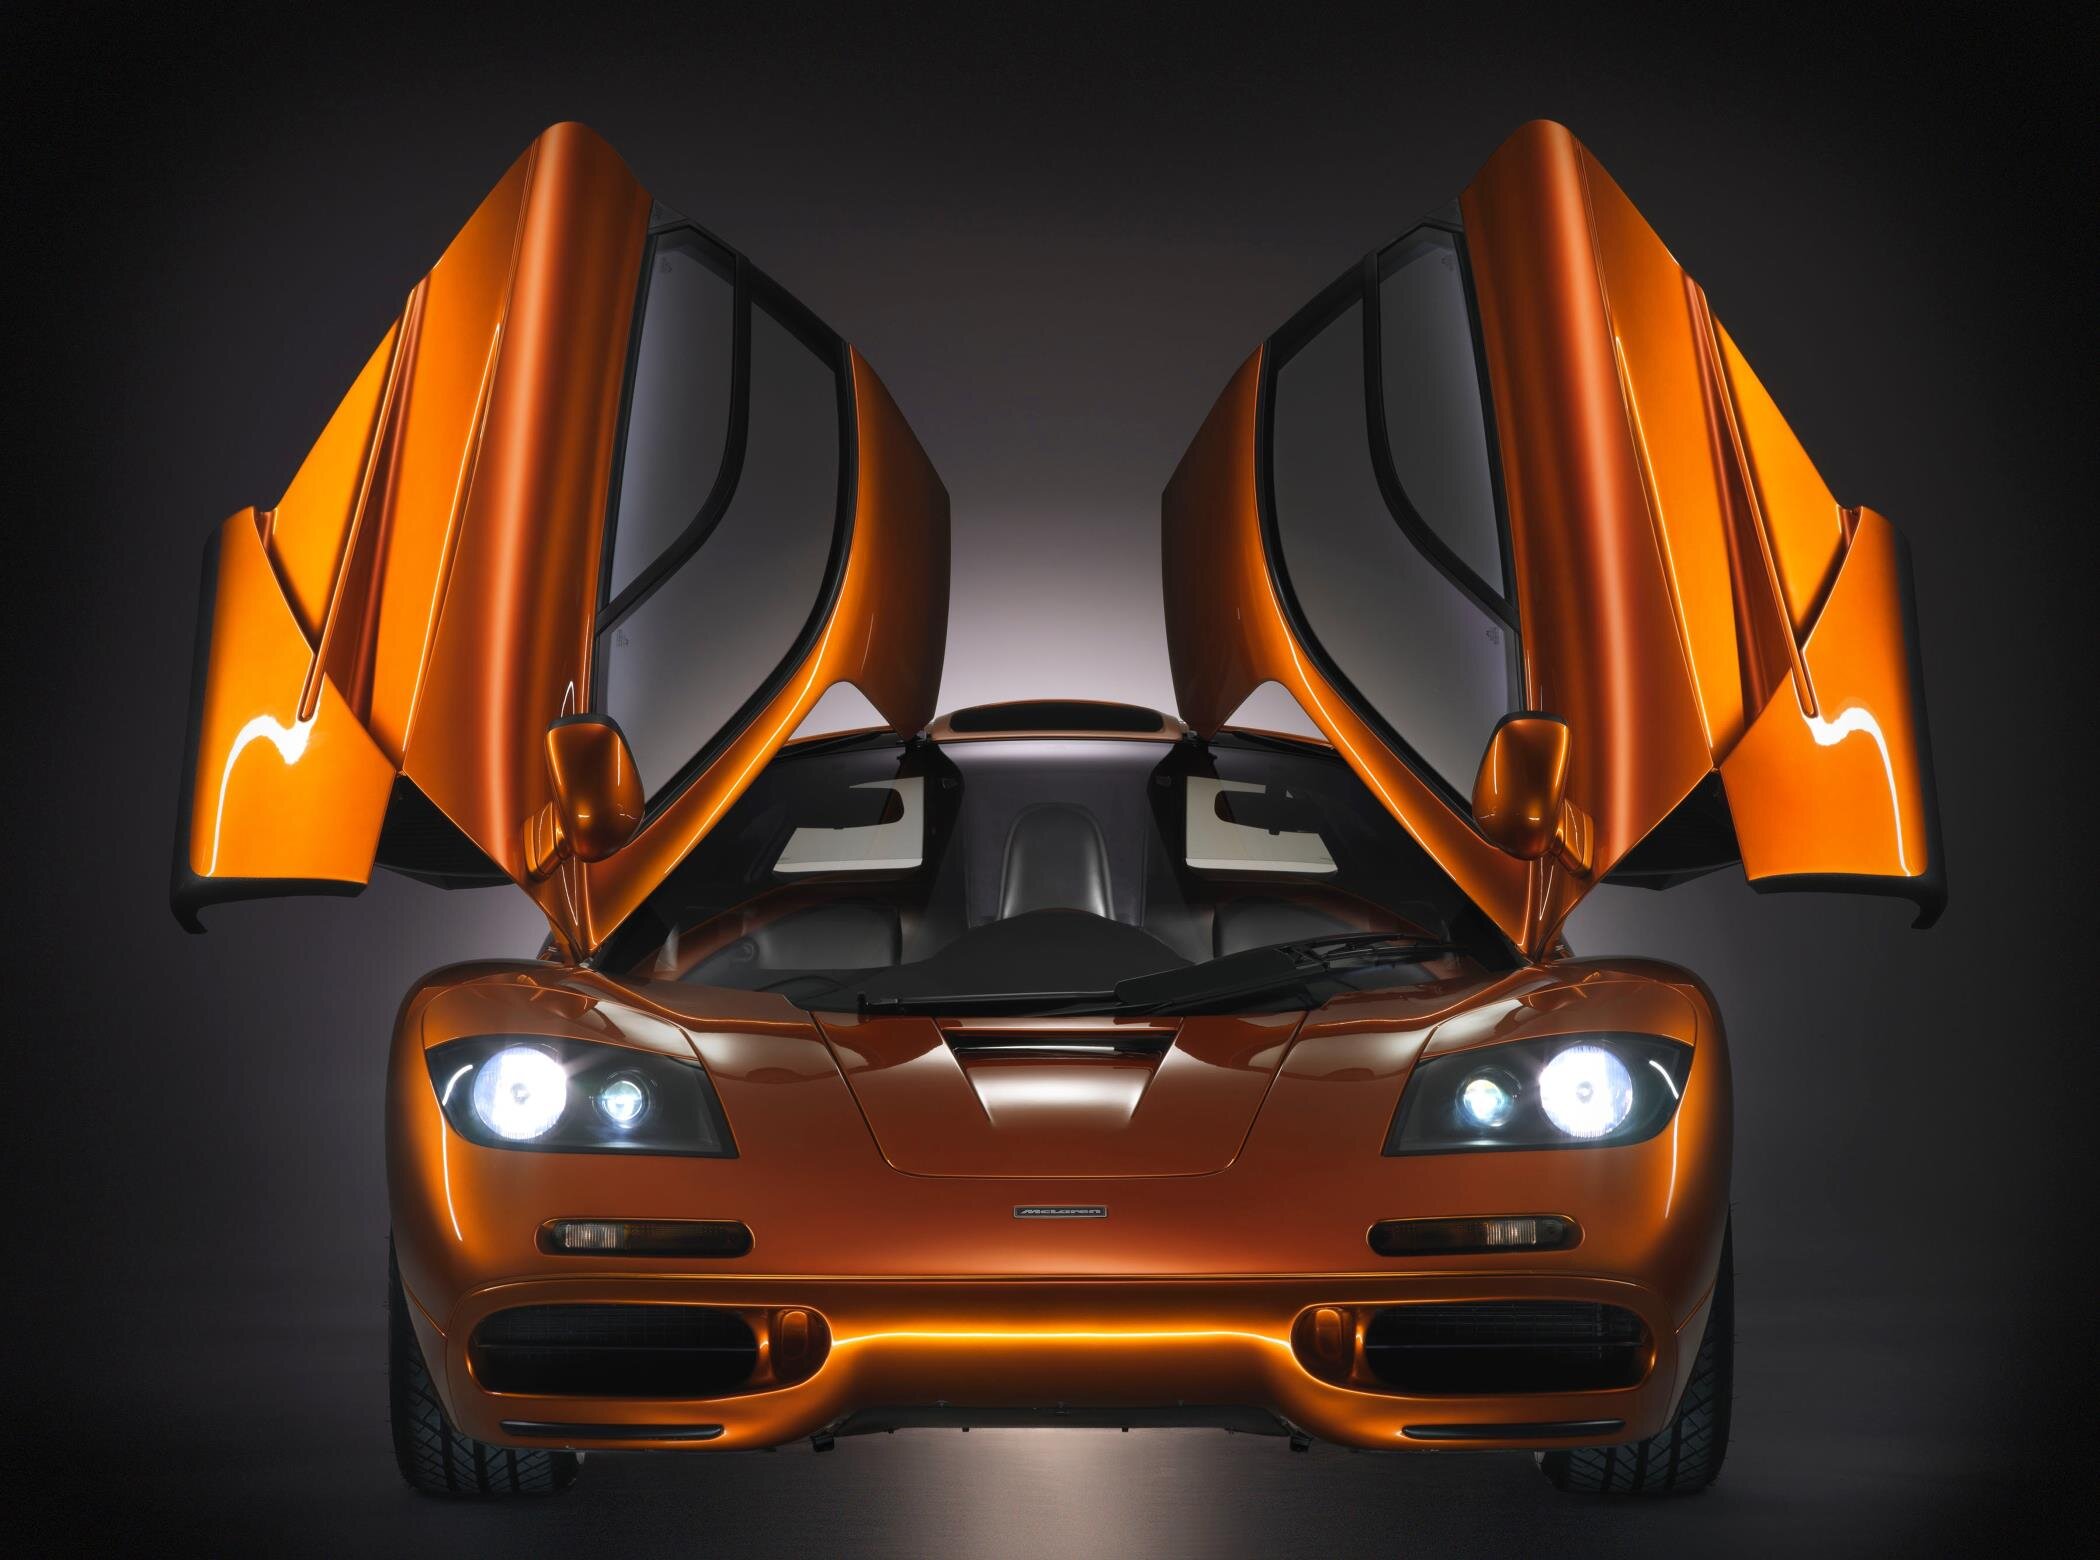 The McLaren F1 would be the dream car for Tiff Needell's roadtrip.jpg